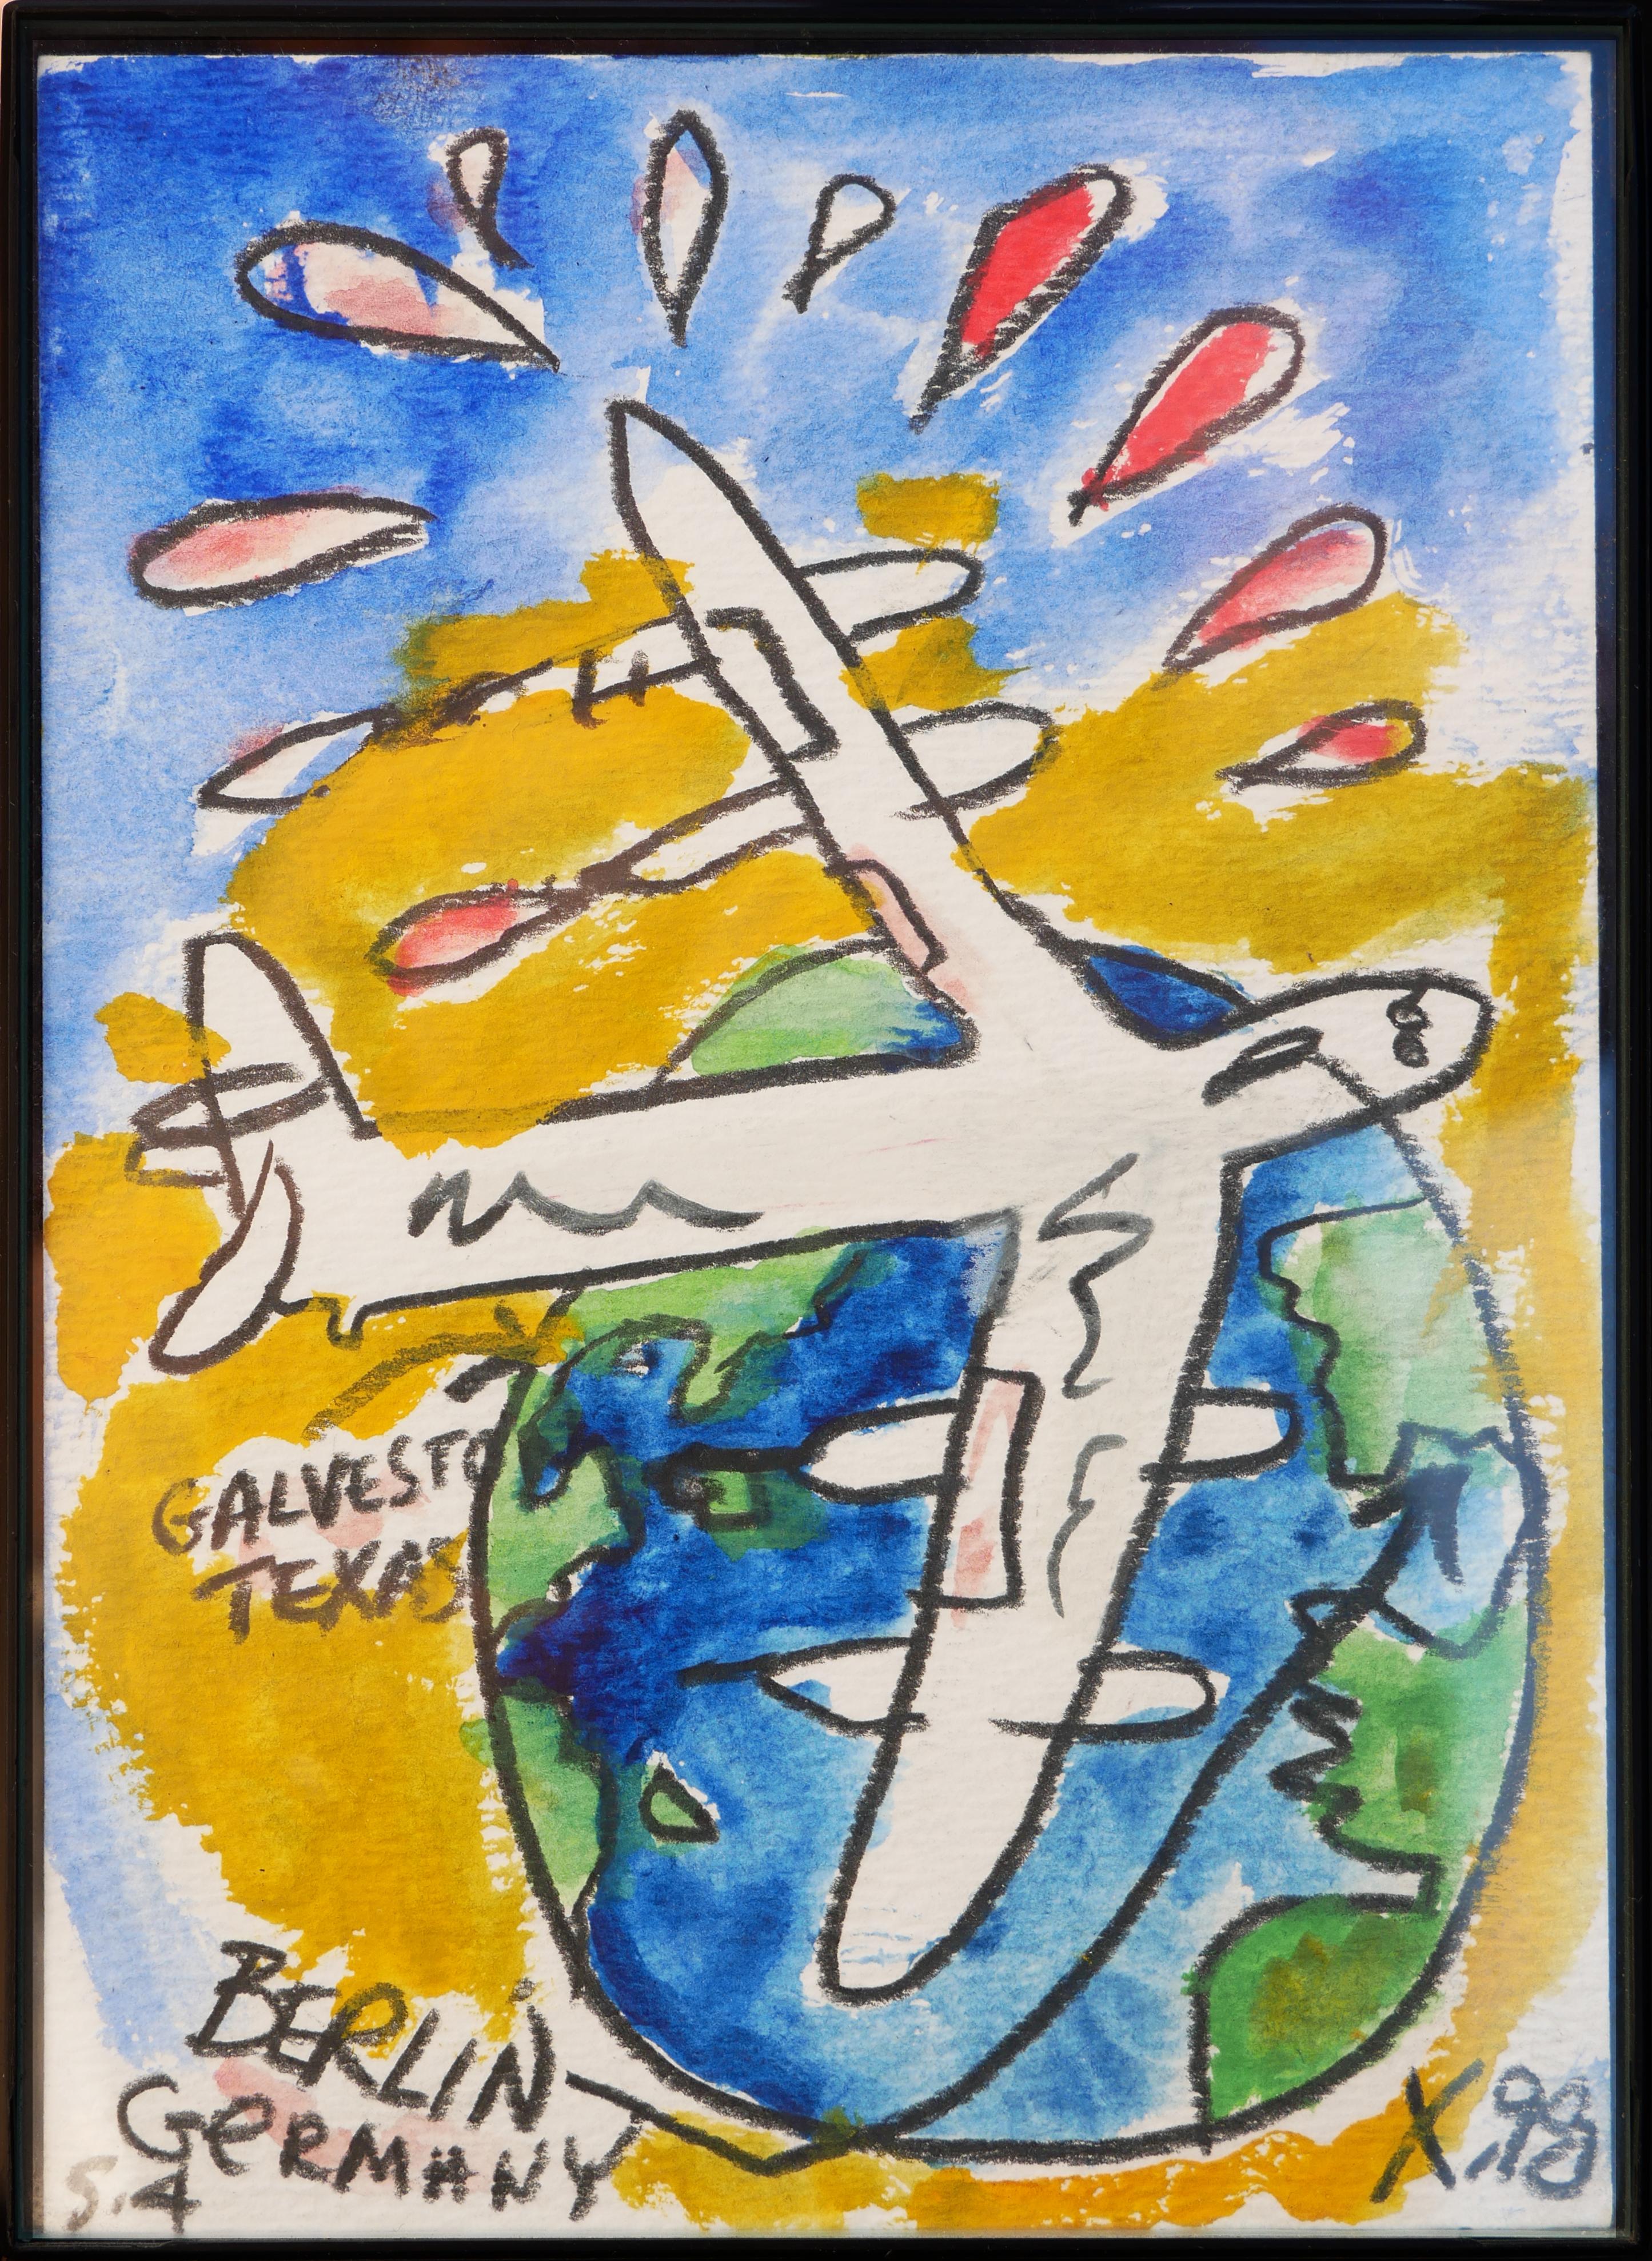 Frank X. Tolbert 2 Abstract Drawing - Modern Colorful Mixed Media Abstract of the Earth & a Plane Seen from Space